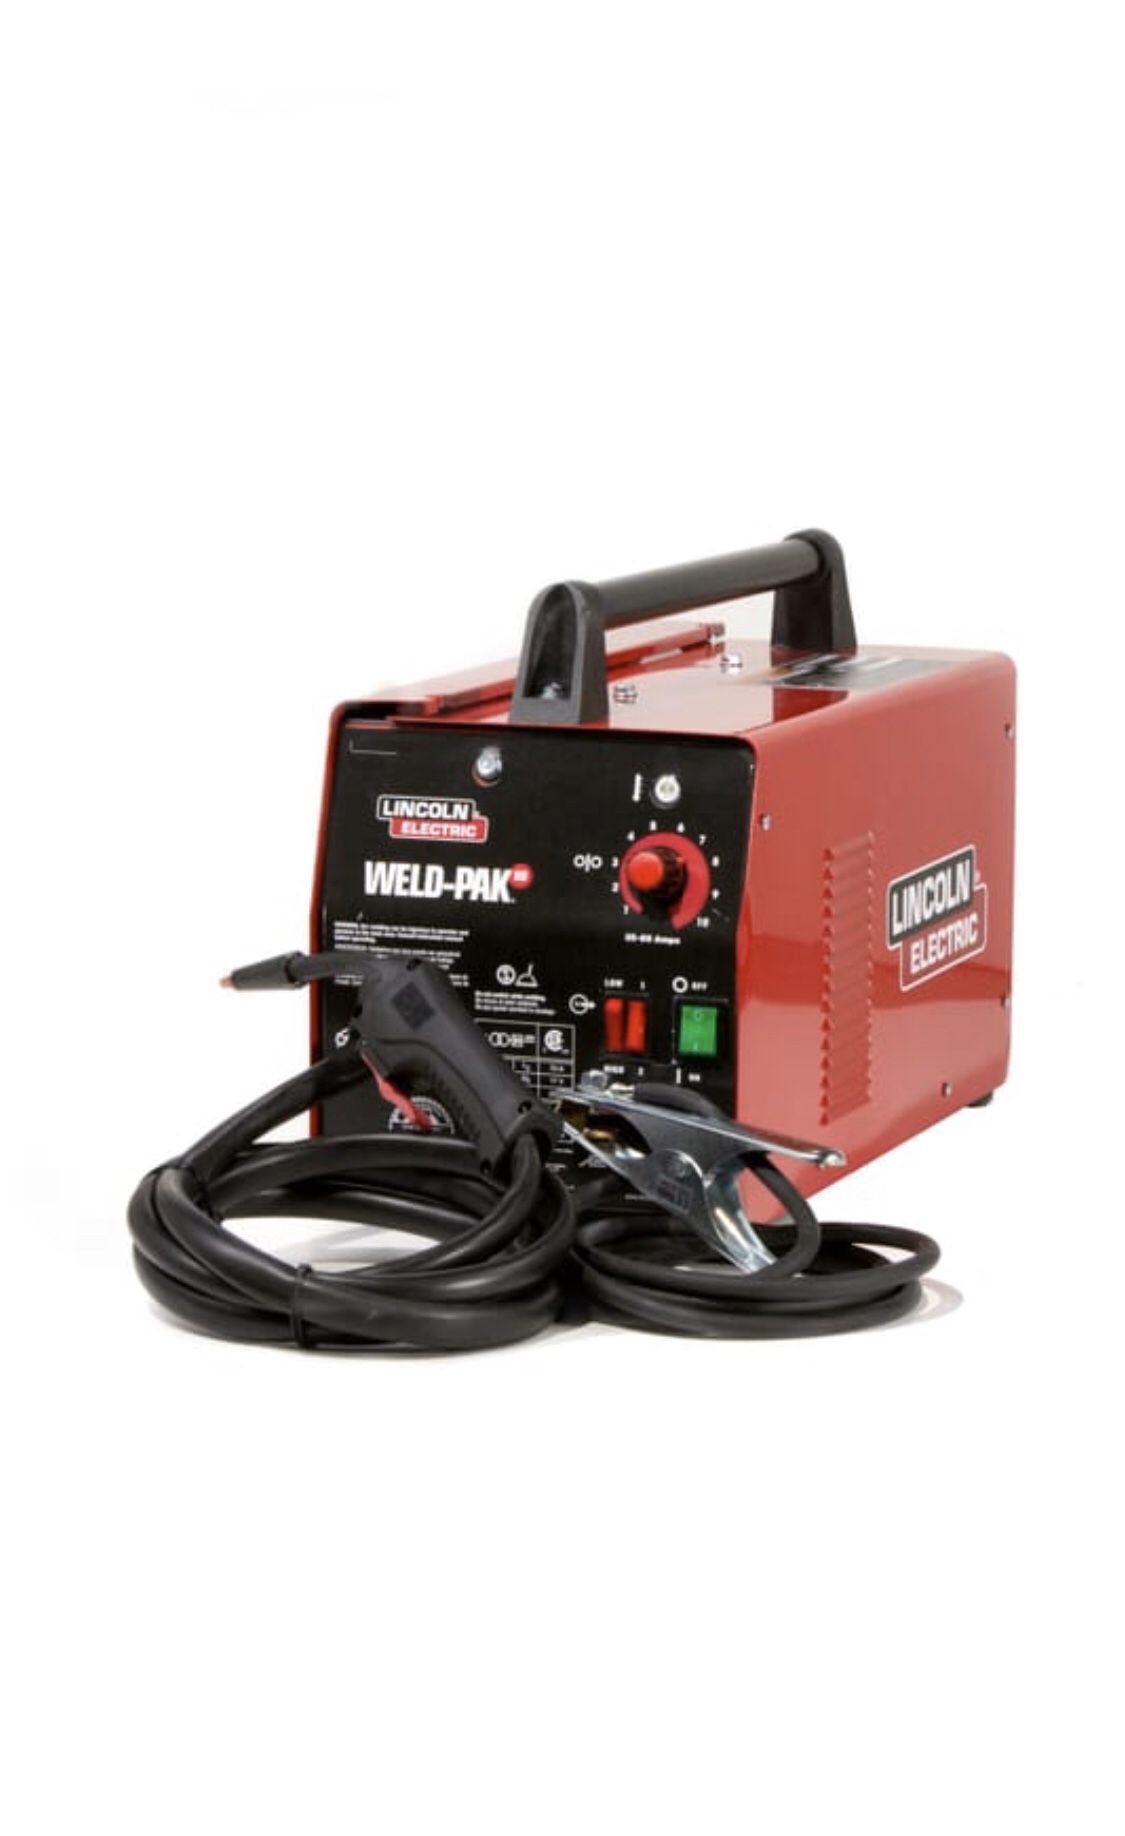 New LINCOLN WELDER ELECTRIC 88 AMP WELD PARK HD FLUX-CORE WIRE FEED WELDER FOR WELDING UP TO 1/8 IN. MILD STEEL, 115-VOLT. WITHOUT BOX